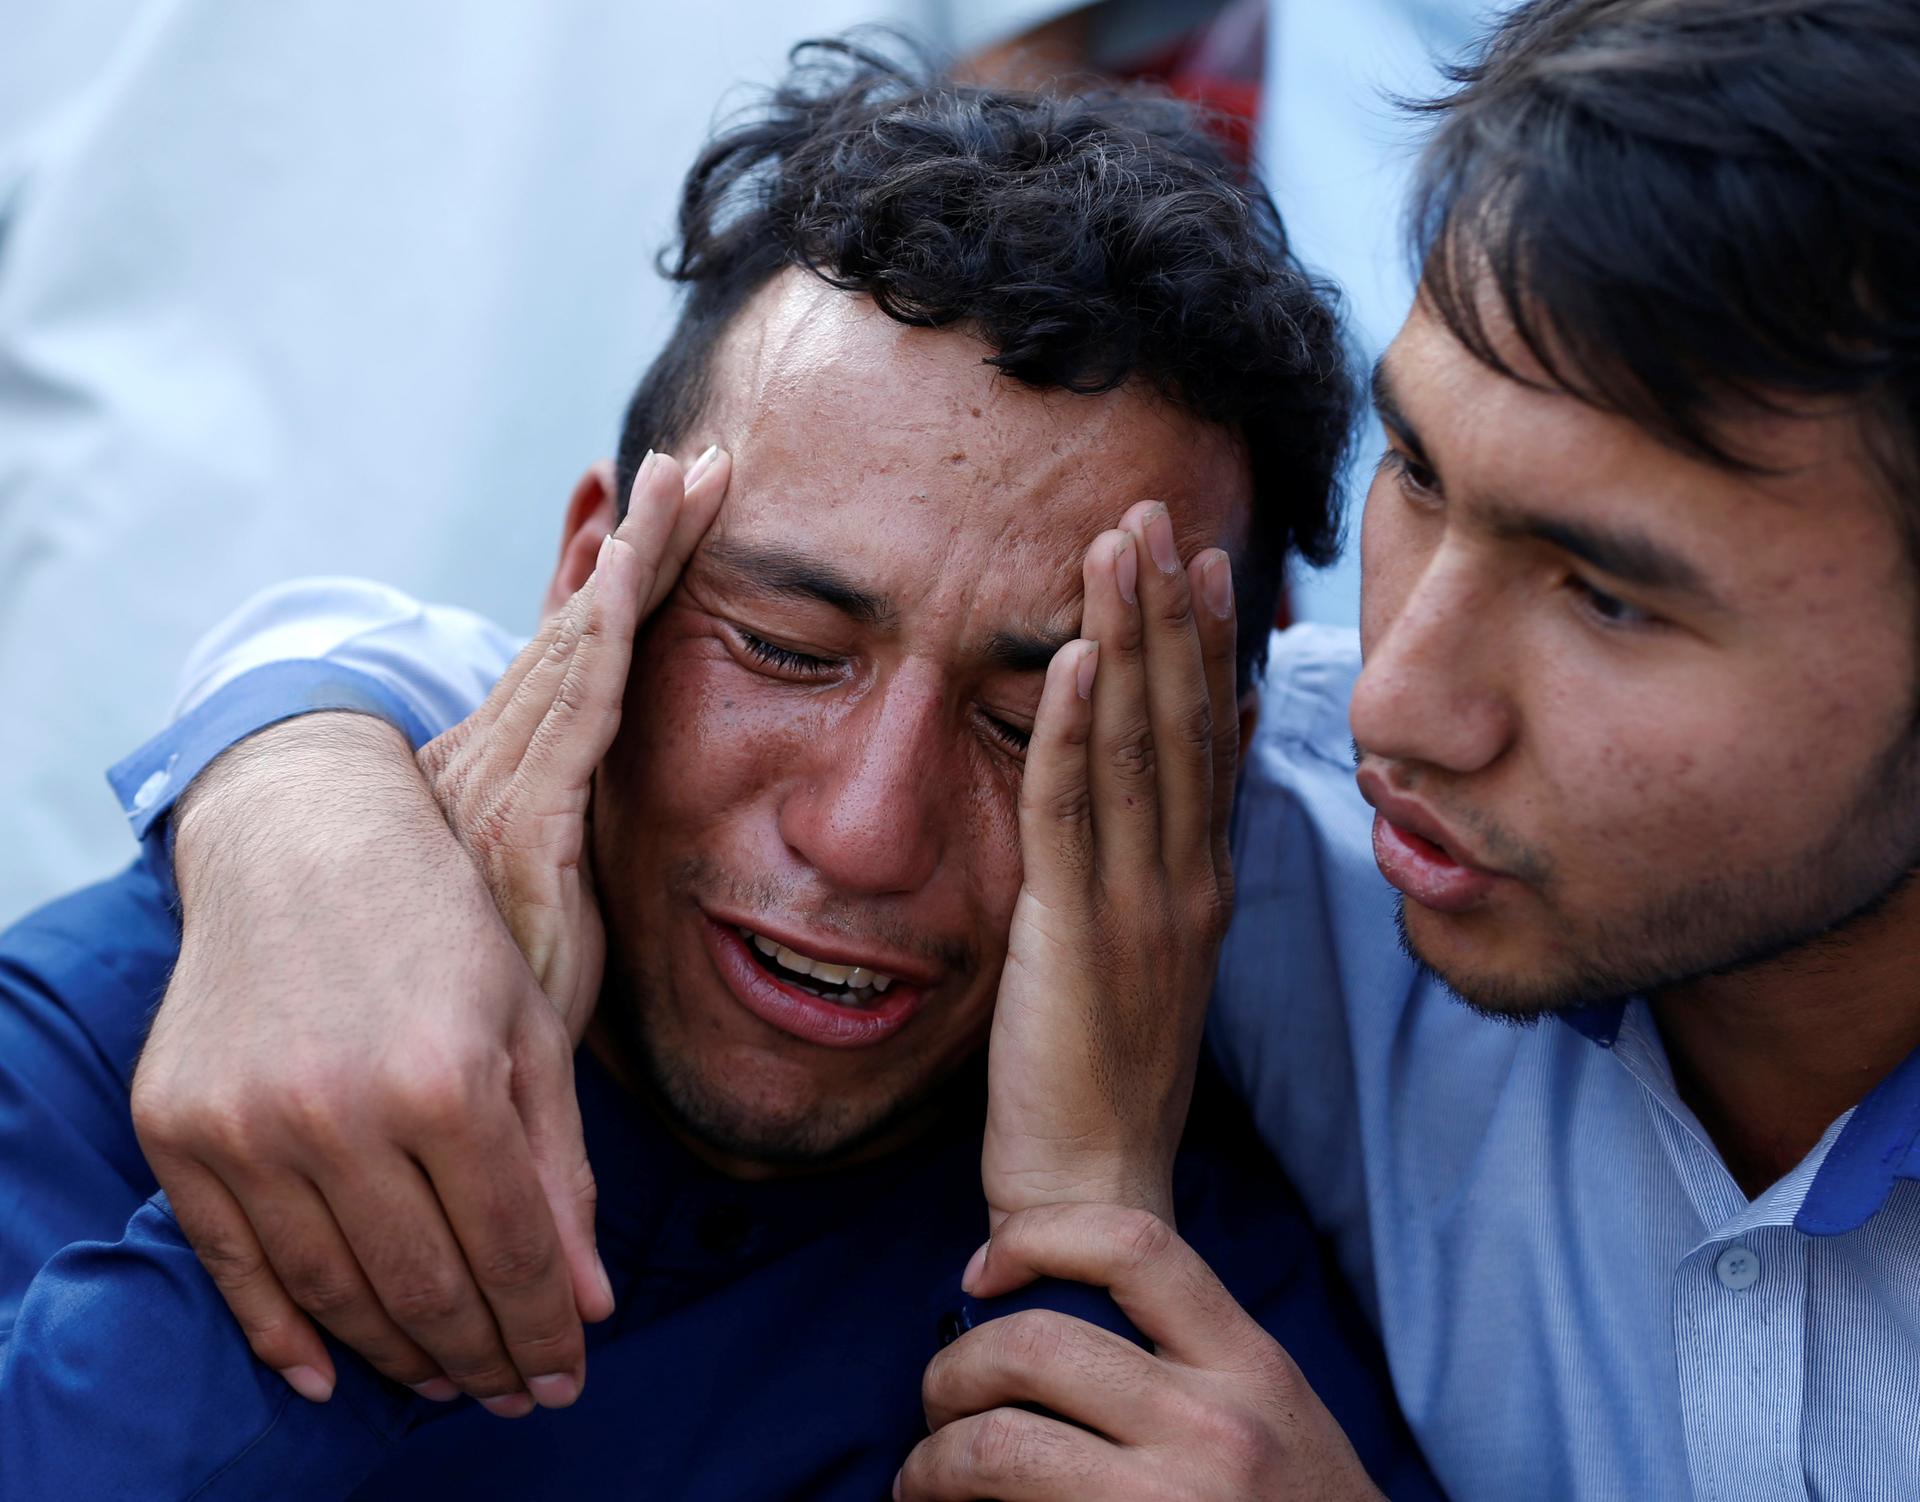 An Afghan man weeps outside a hospital after a suicide attack in Kabul, Afghanistan July 23, 2016.